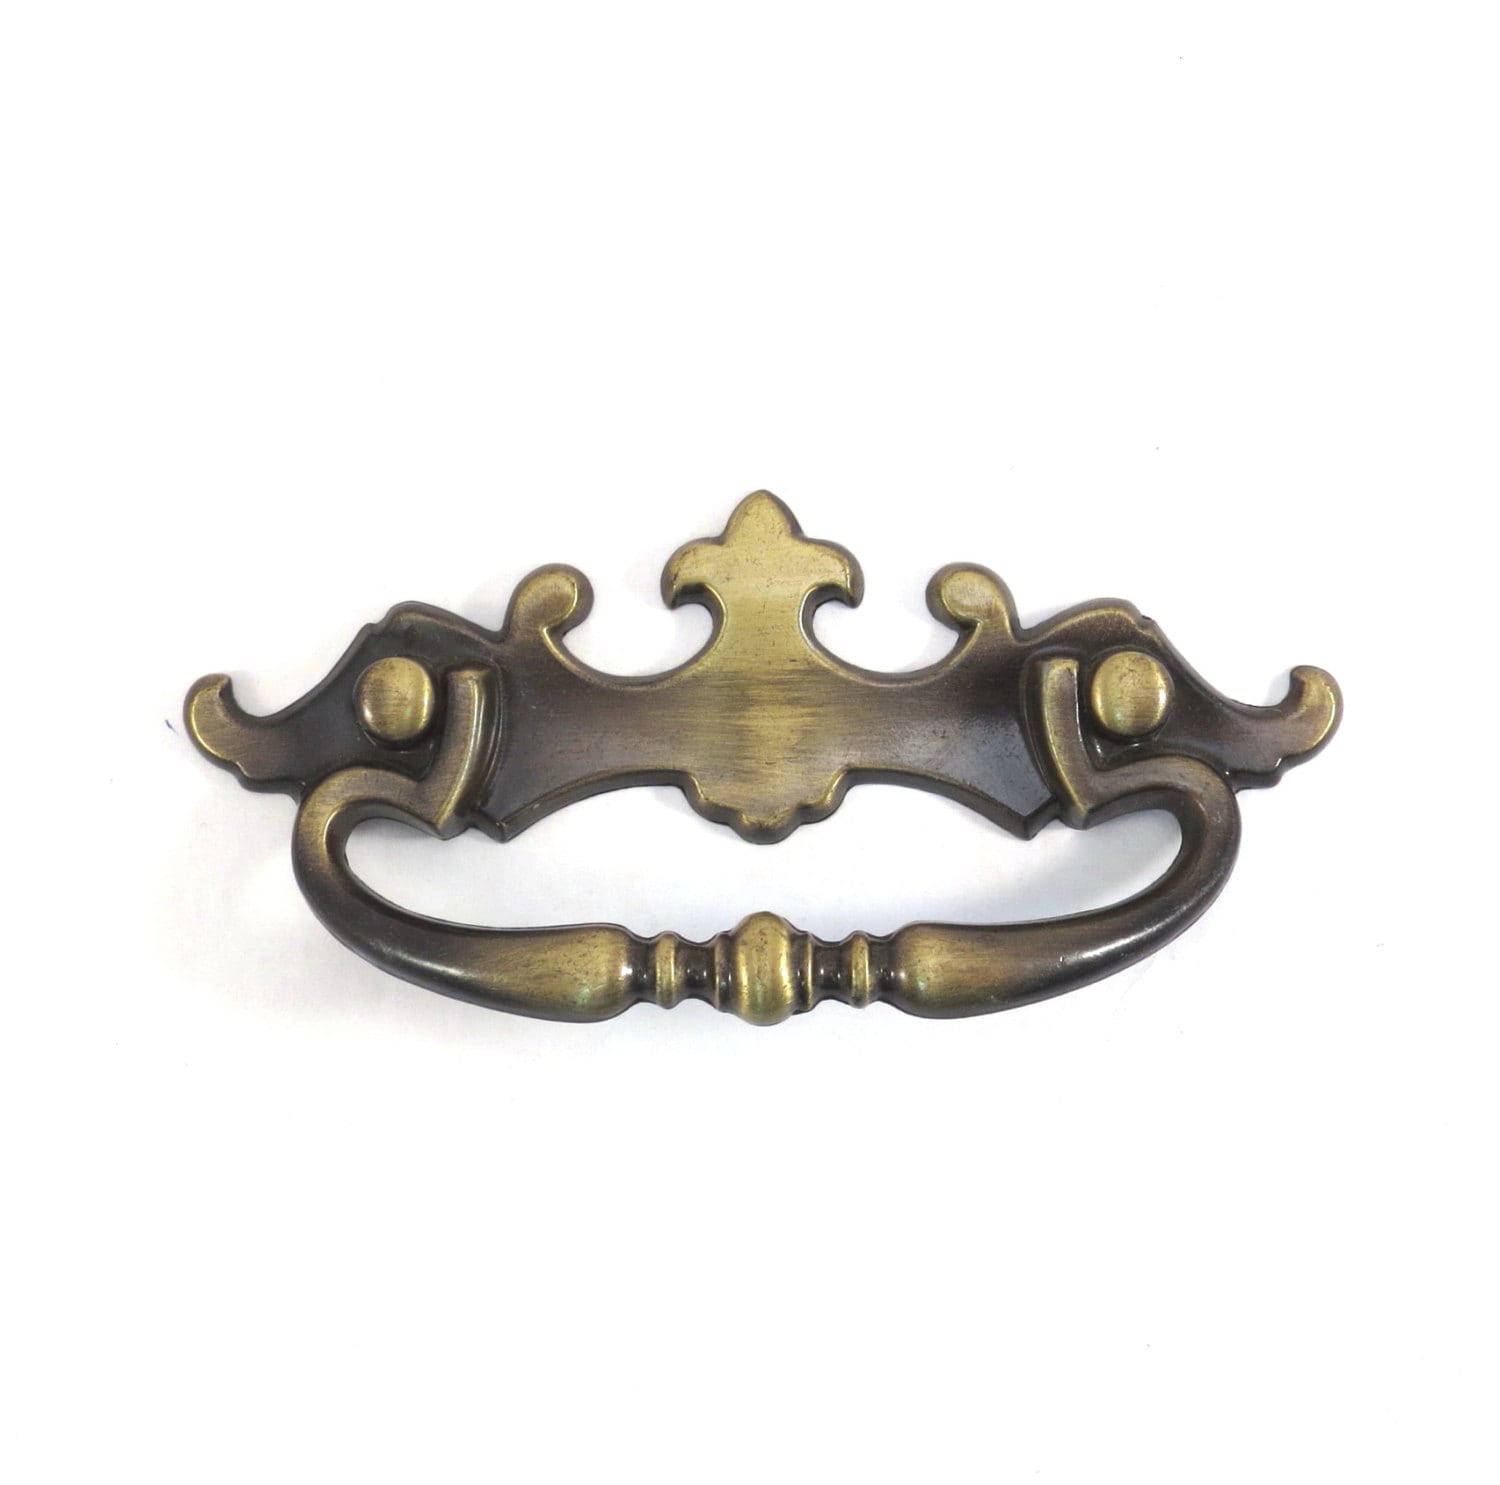 Antiqued Gold Colonial Drawer Pull Hardware Vintage